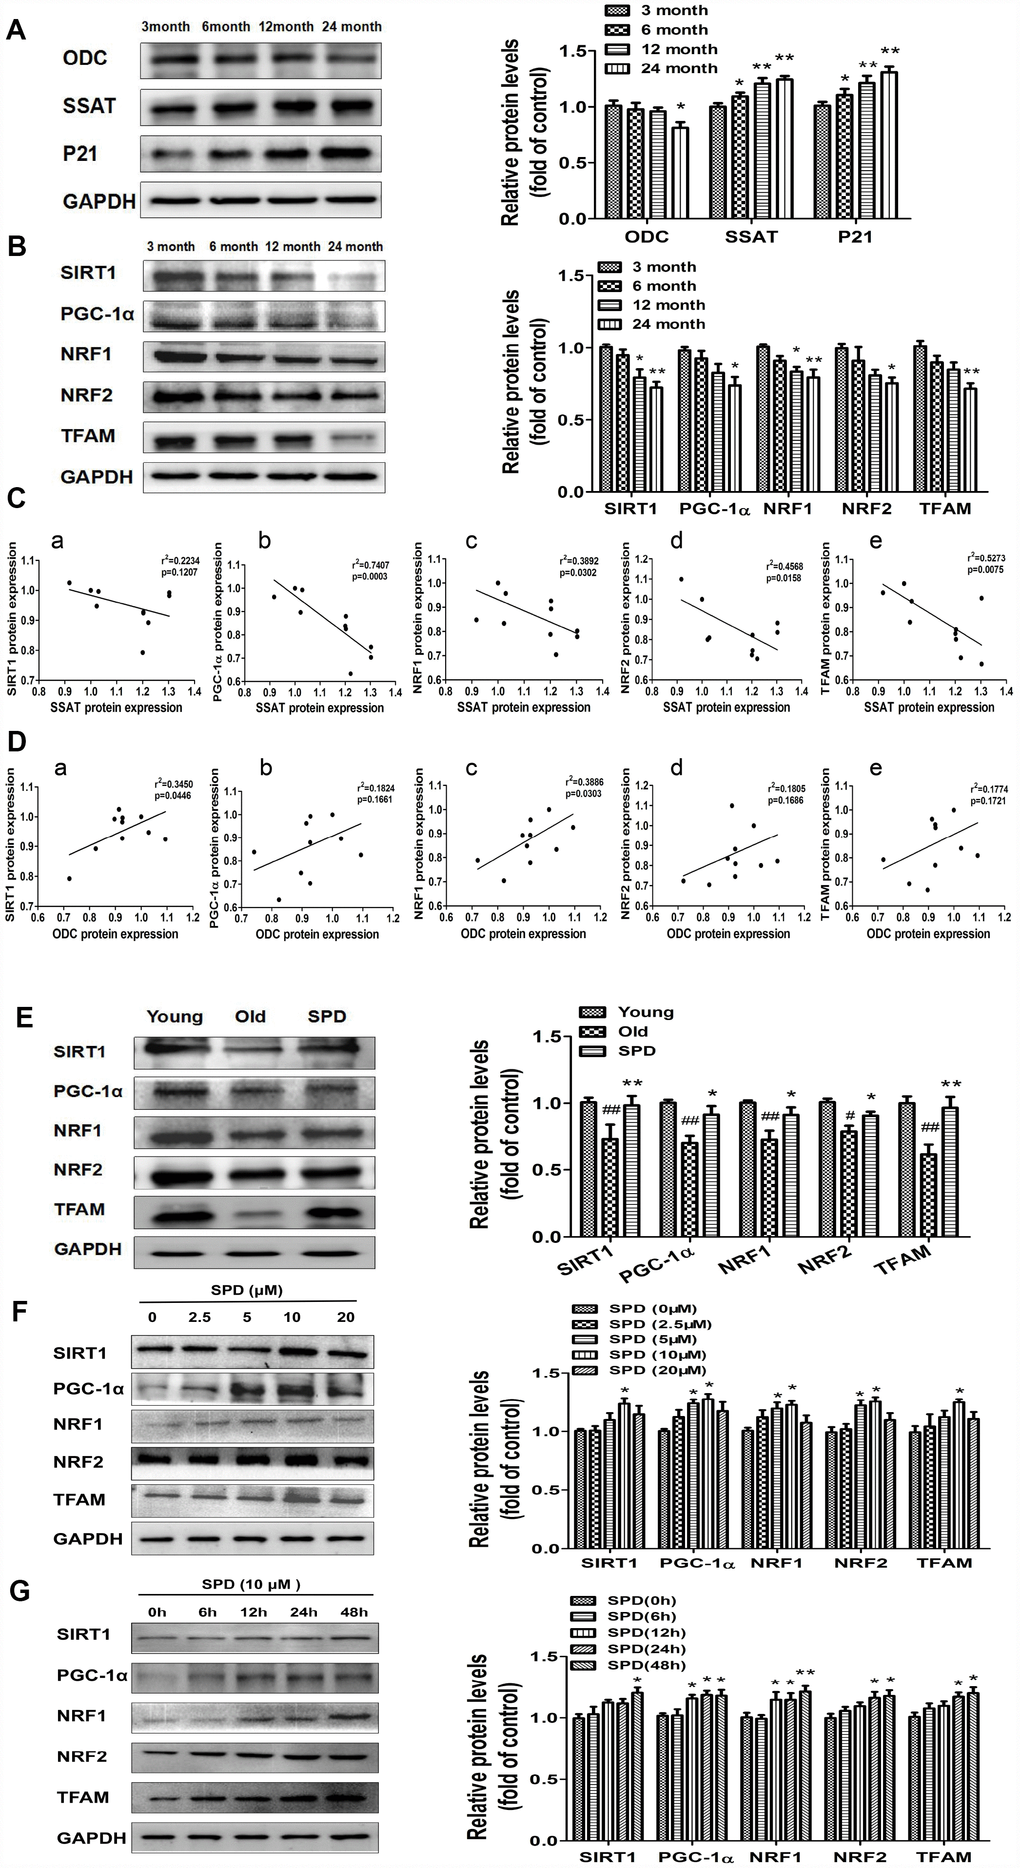 SPD prevents age-associated depletion in myocardial polyamines and alterations of SIRT1/PGC-1α signaling pathway proteins. Representative immunoblot bands for ODC, SSAT, and p21 (A), and for SIRT1, PGC-1α, NRF1, NRF2, and TFAM (B) in myocardium from 3-, 6-, 12- and 24-month-old rats. GAPDH was used as loading control. (n = 10). * P ** P C) Correlation between ODC and (a) SIRT1, (b) PGC-1α, (c) NRF1, (d) NRF2, and (e) TFAM in cardiac tissue from rats of different ages. (D) Correlation between SSAT and (a) SIRT1, (b) PGC-1α, (c) NRF1, (d) NRF2, and (e) TFAM in cardiac tissue from rats of different ages (n = 10). (E) Representative immunoblot bands for SIRT1, PGC-1α, NRF1, NRF2, and TFAM in the myocardium of young (3 months of age), old (24 months of age), and SPD-treated (6 weeks) old rats. (n = 4). # P ## P * P ** P F, G) Expression of SIRT1, PGC-1α, NRF1, NRF2, and TFAM measured by western blot in NRMCs treated with 0, 2.5, 5, 10, or 20 μM SPD for 24 h (F) or 10 μM SPD for 0, 6, 12, 24, and 48 h (G). Quantification of protein expression is shown on the right-hand side of the graphs (n = 4). * P ** P 